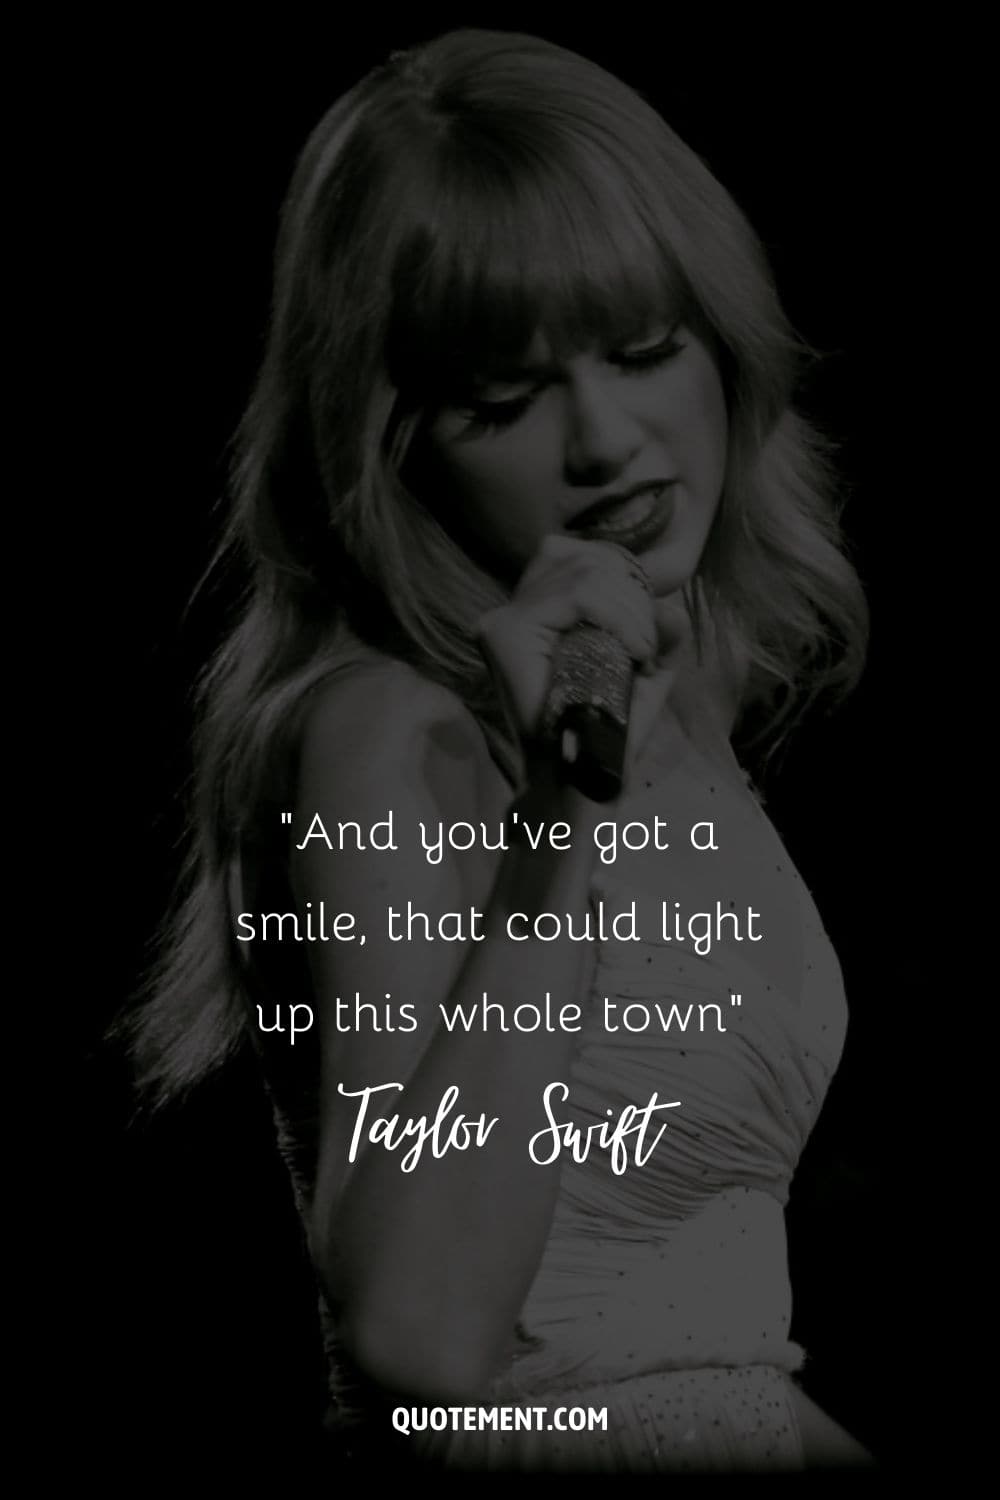 “And you've got a smile, that could light up this whole town” ― Taylor Swift